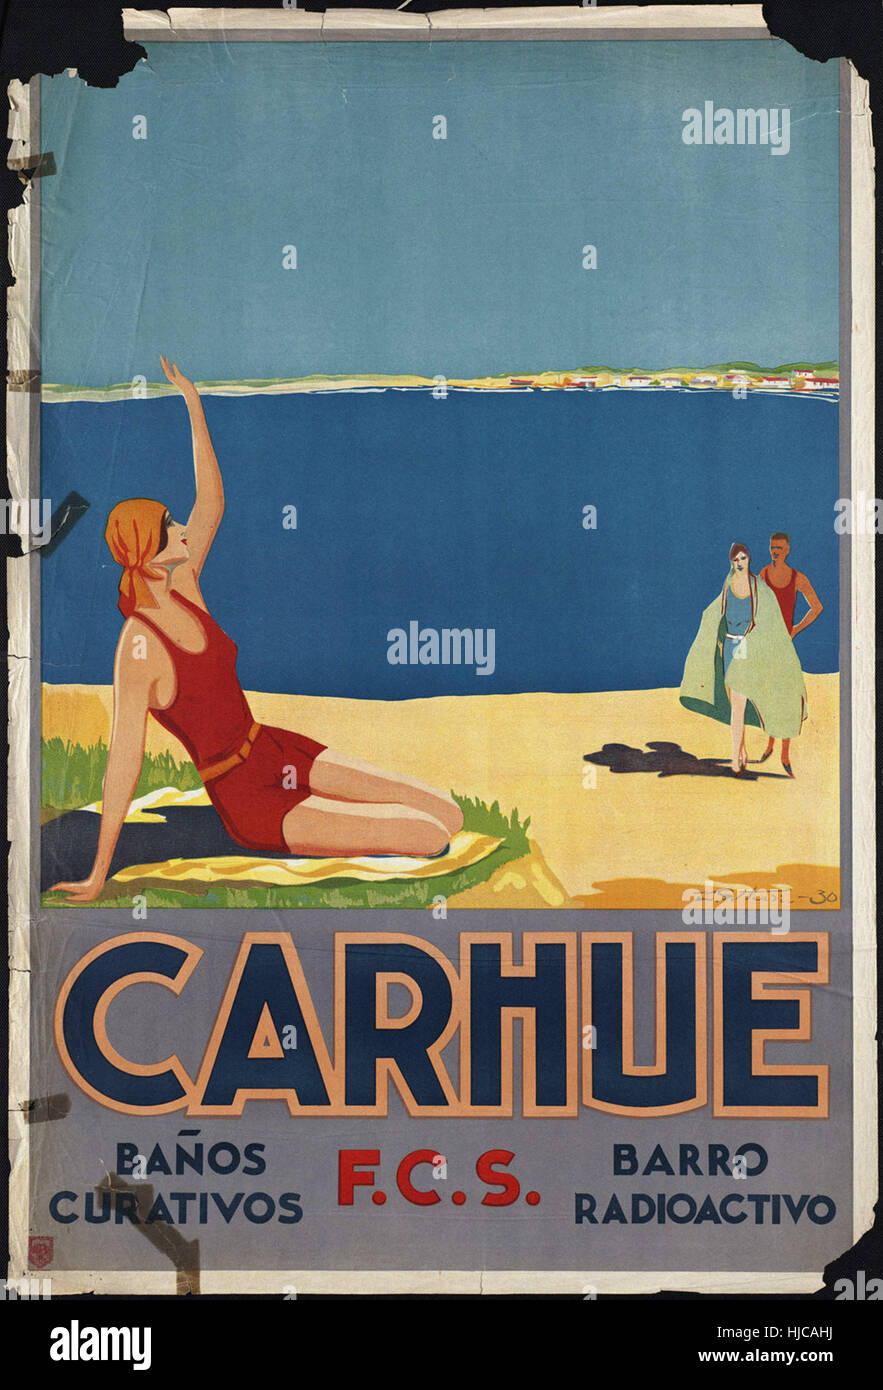 Carhue  - Vintage travel poster 1920s-1940s Stock Photo